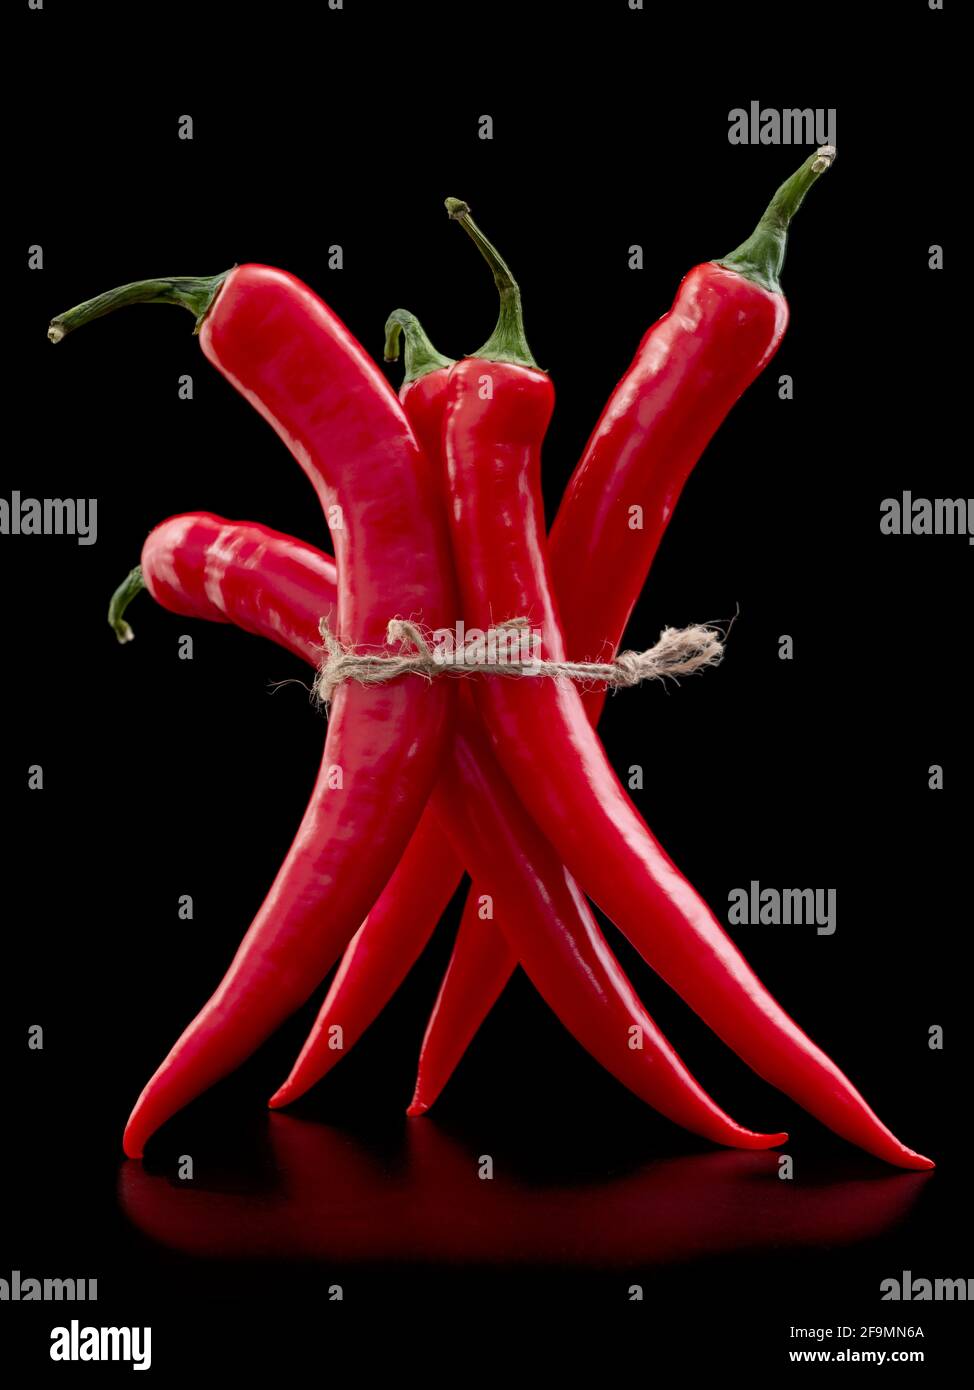 Cayenne, long red chili peppers on dark background Stock Photo